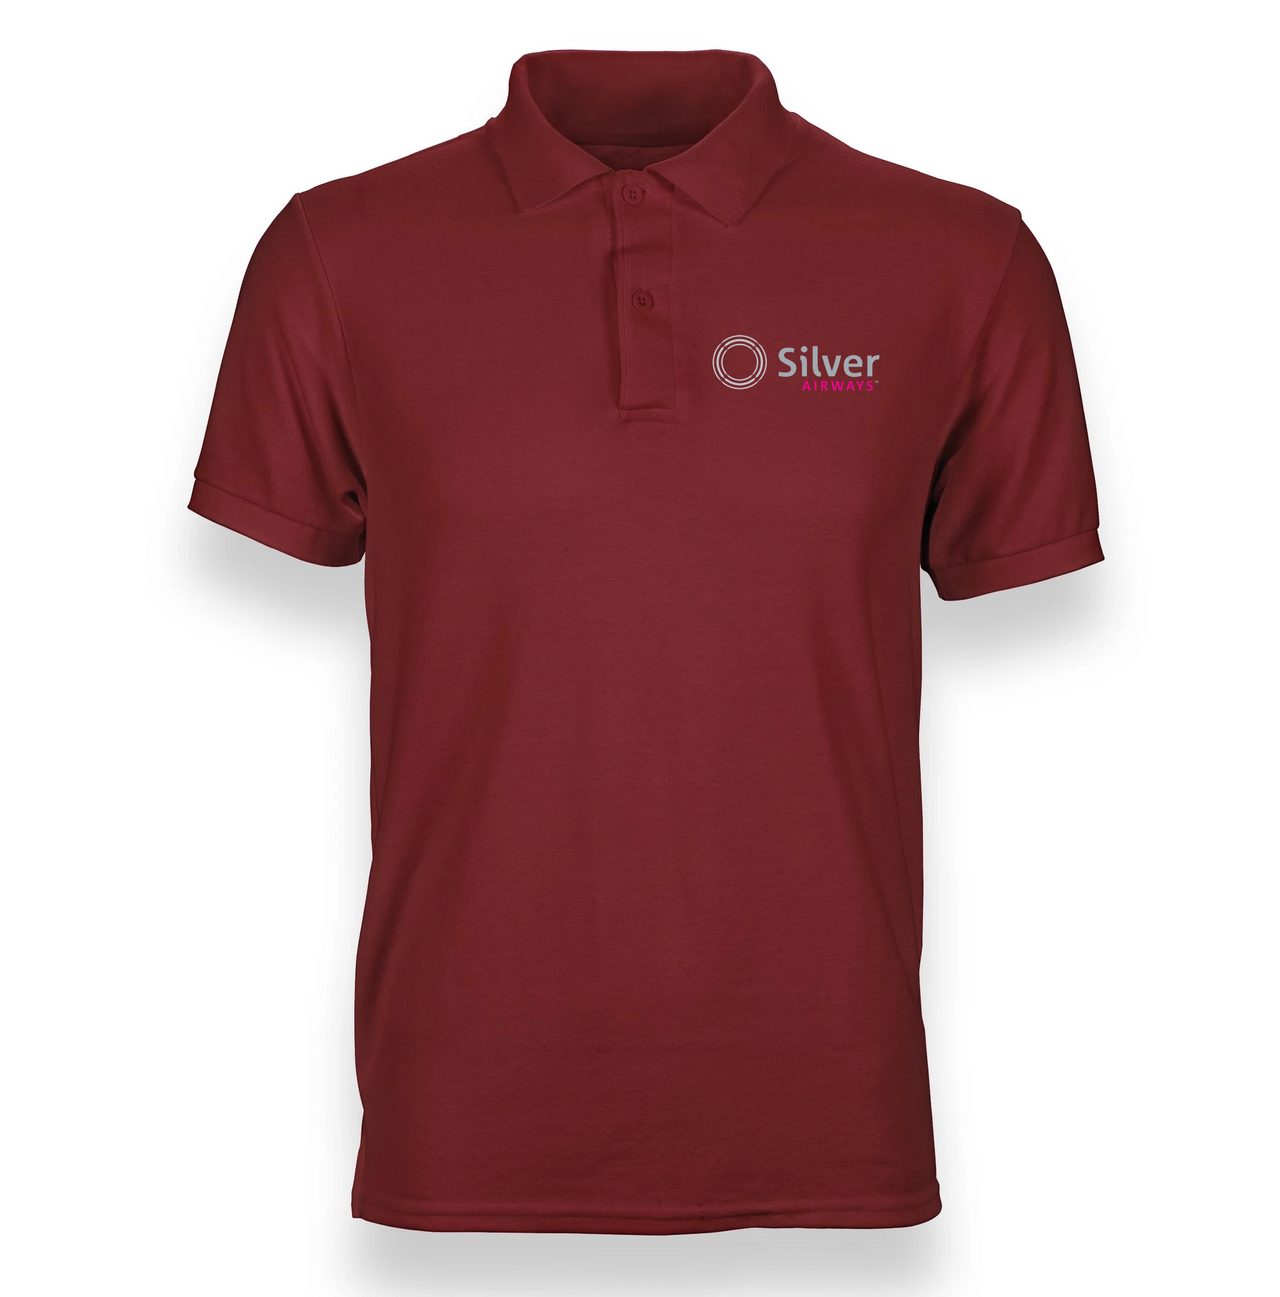 SILVER AIRLINES POLO T-SHIRT